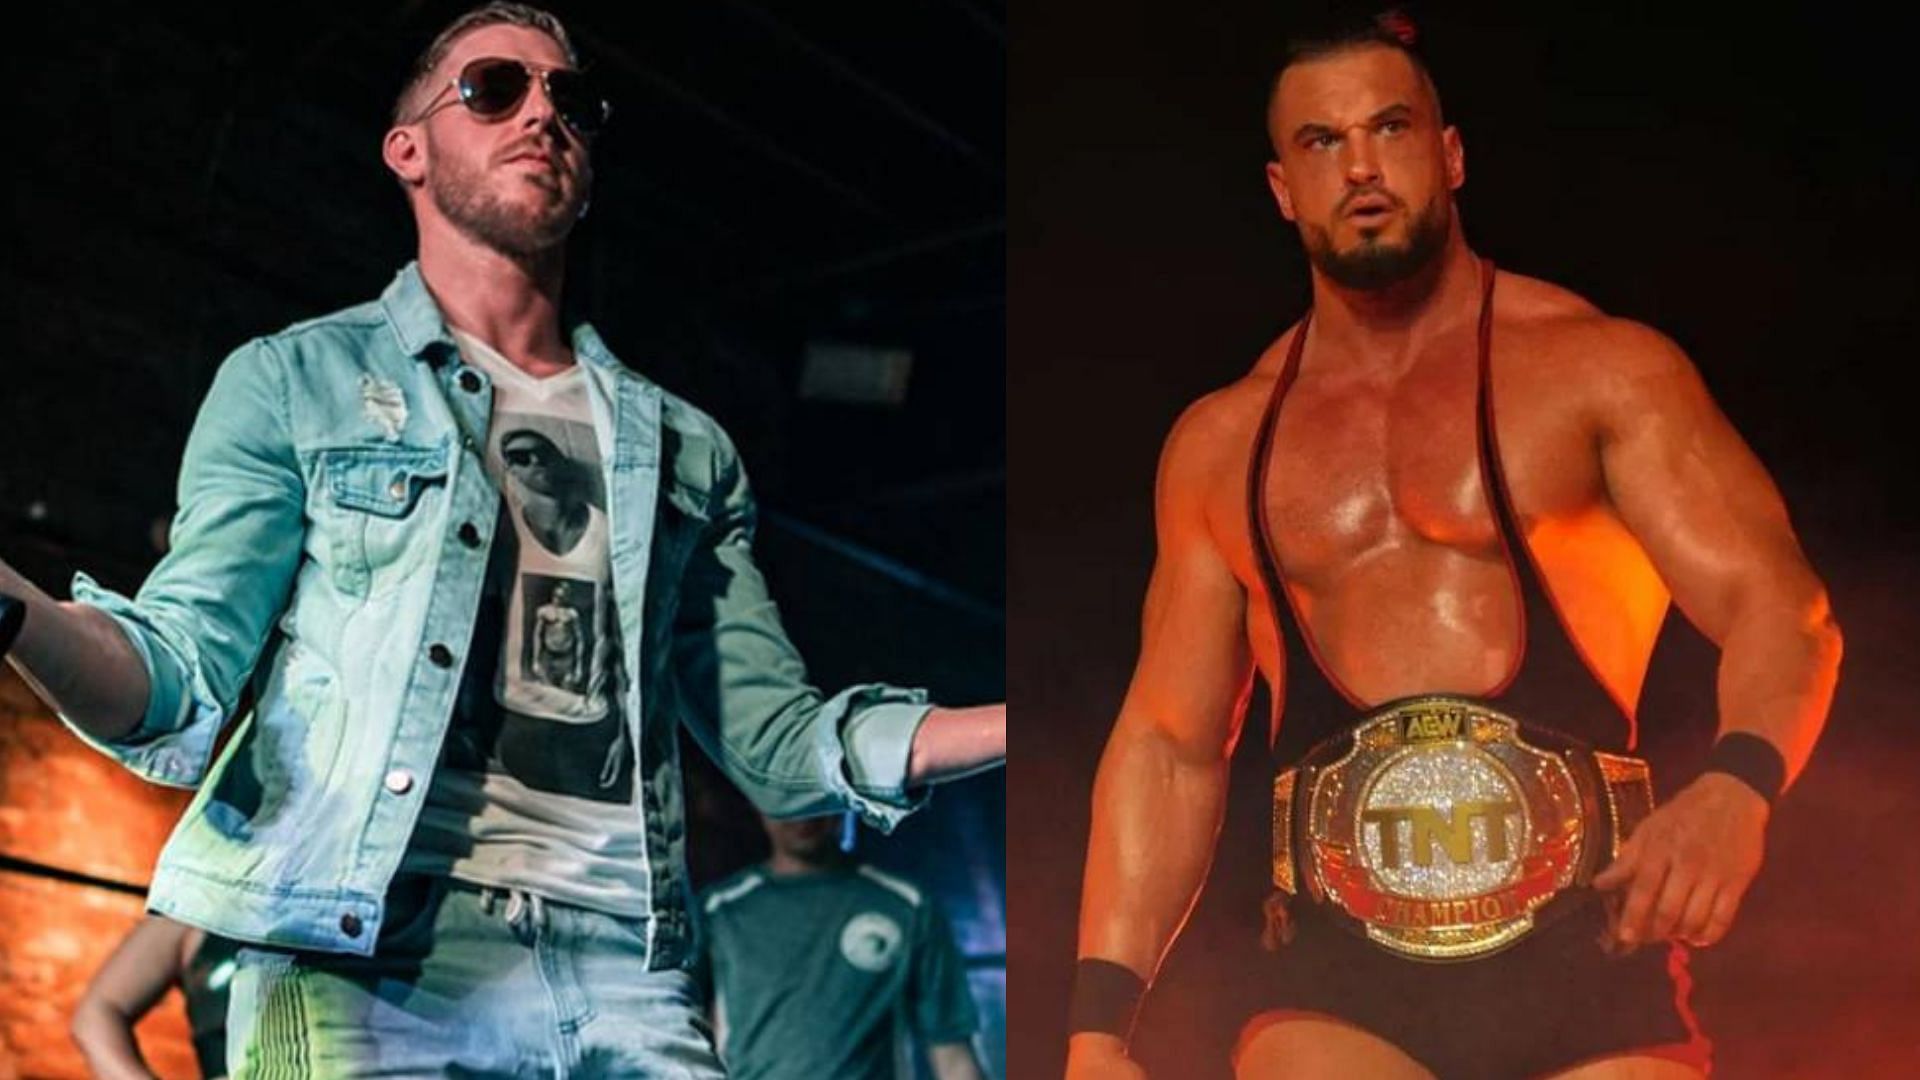 Details for the March 8, 2023, episode of AEW Dynamite